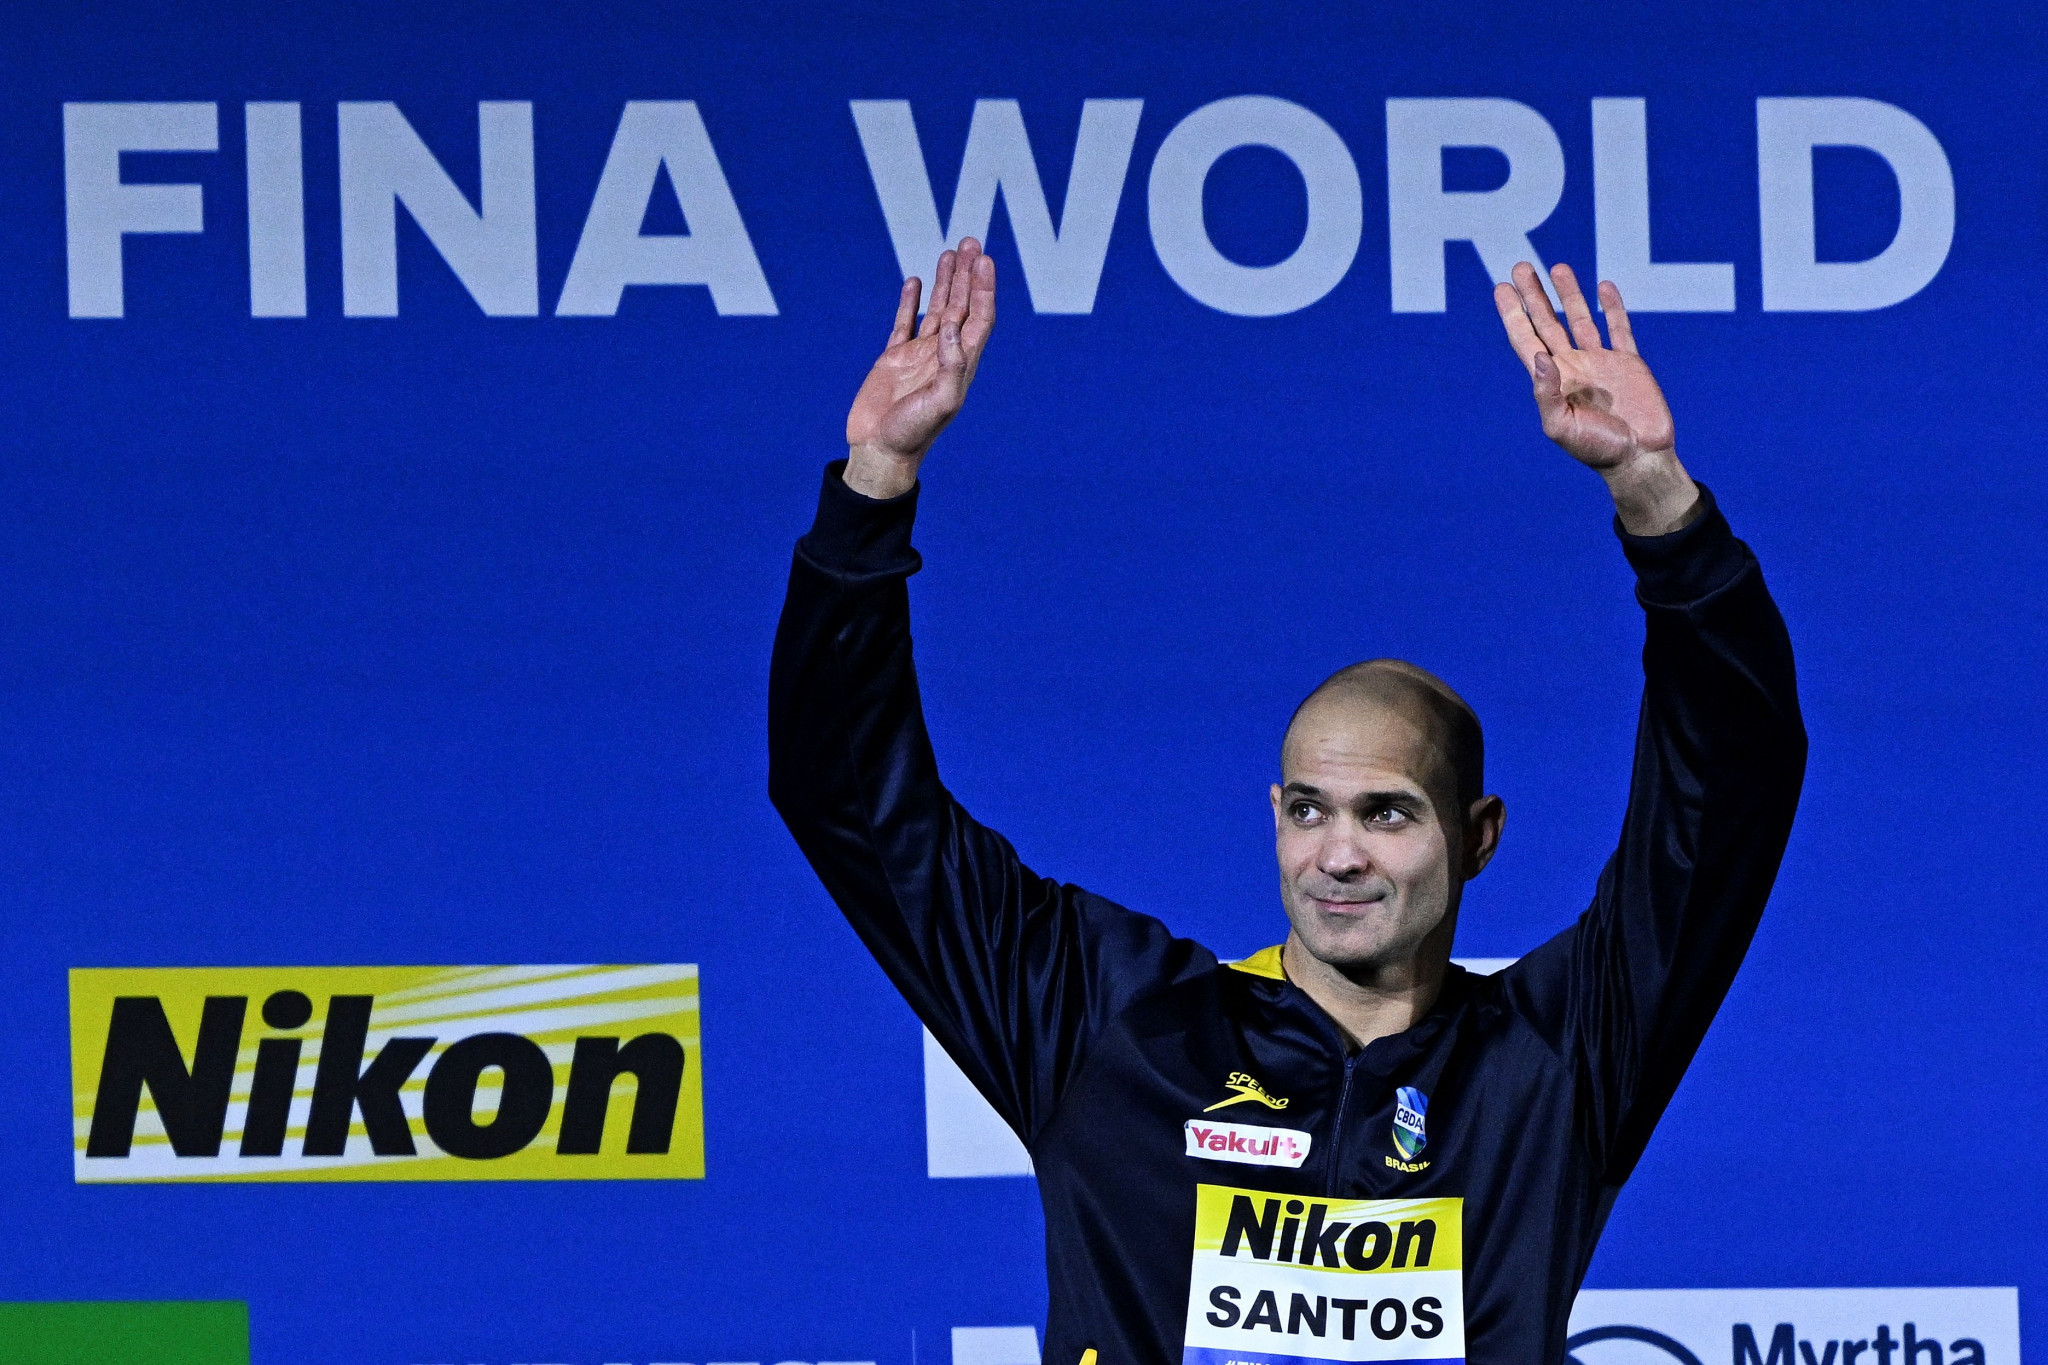 Brazil's Nicholas Santos became the first swimmer above the age of 40 to medal at the FINA World Championships ©Getty Images